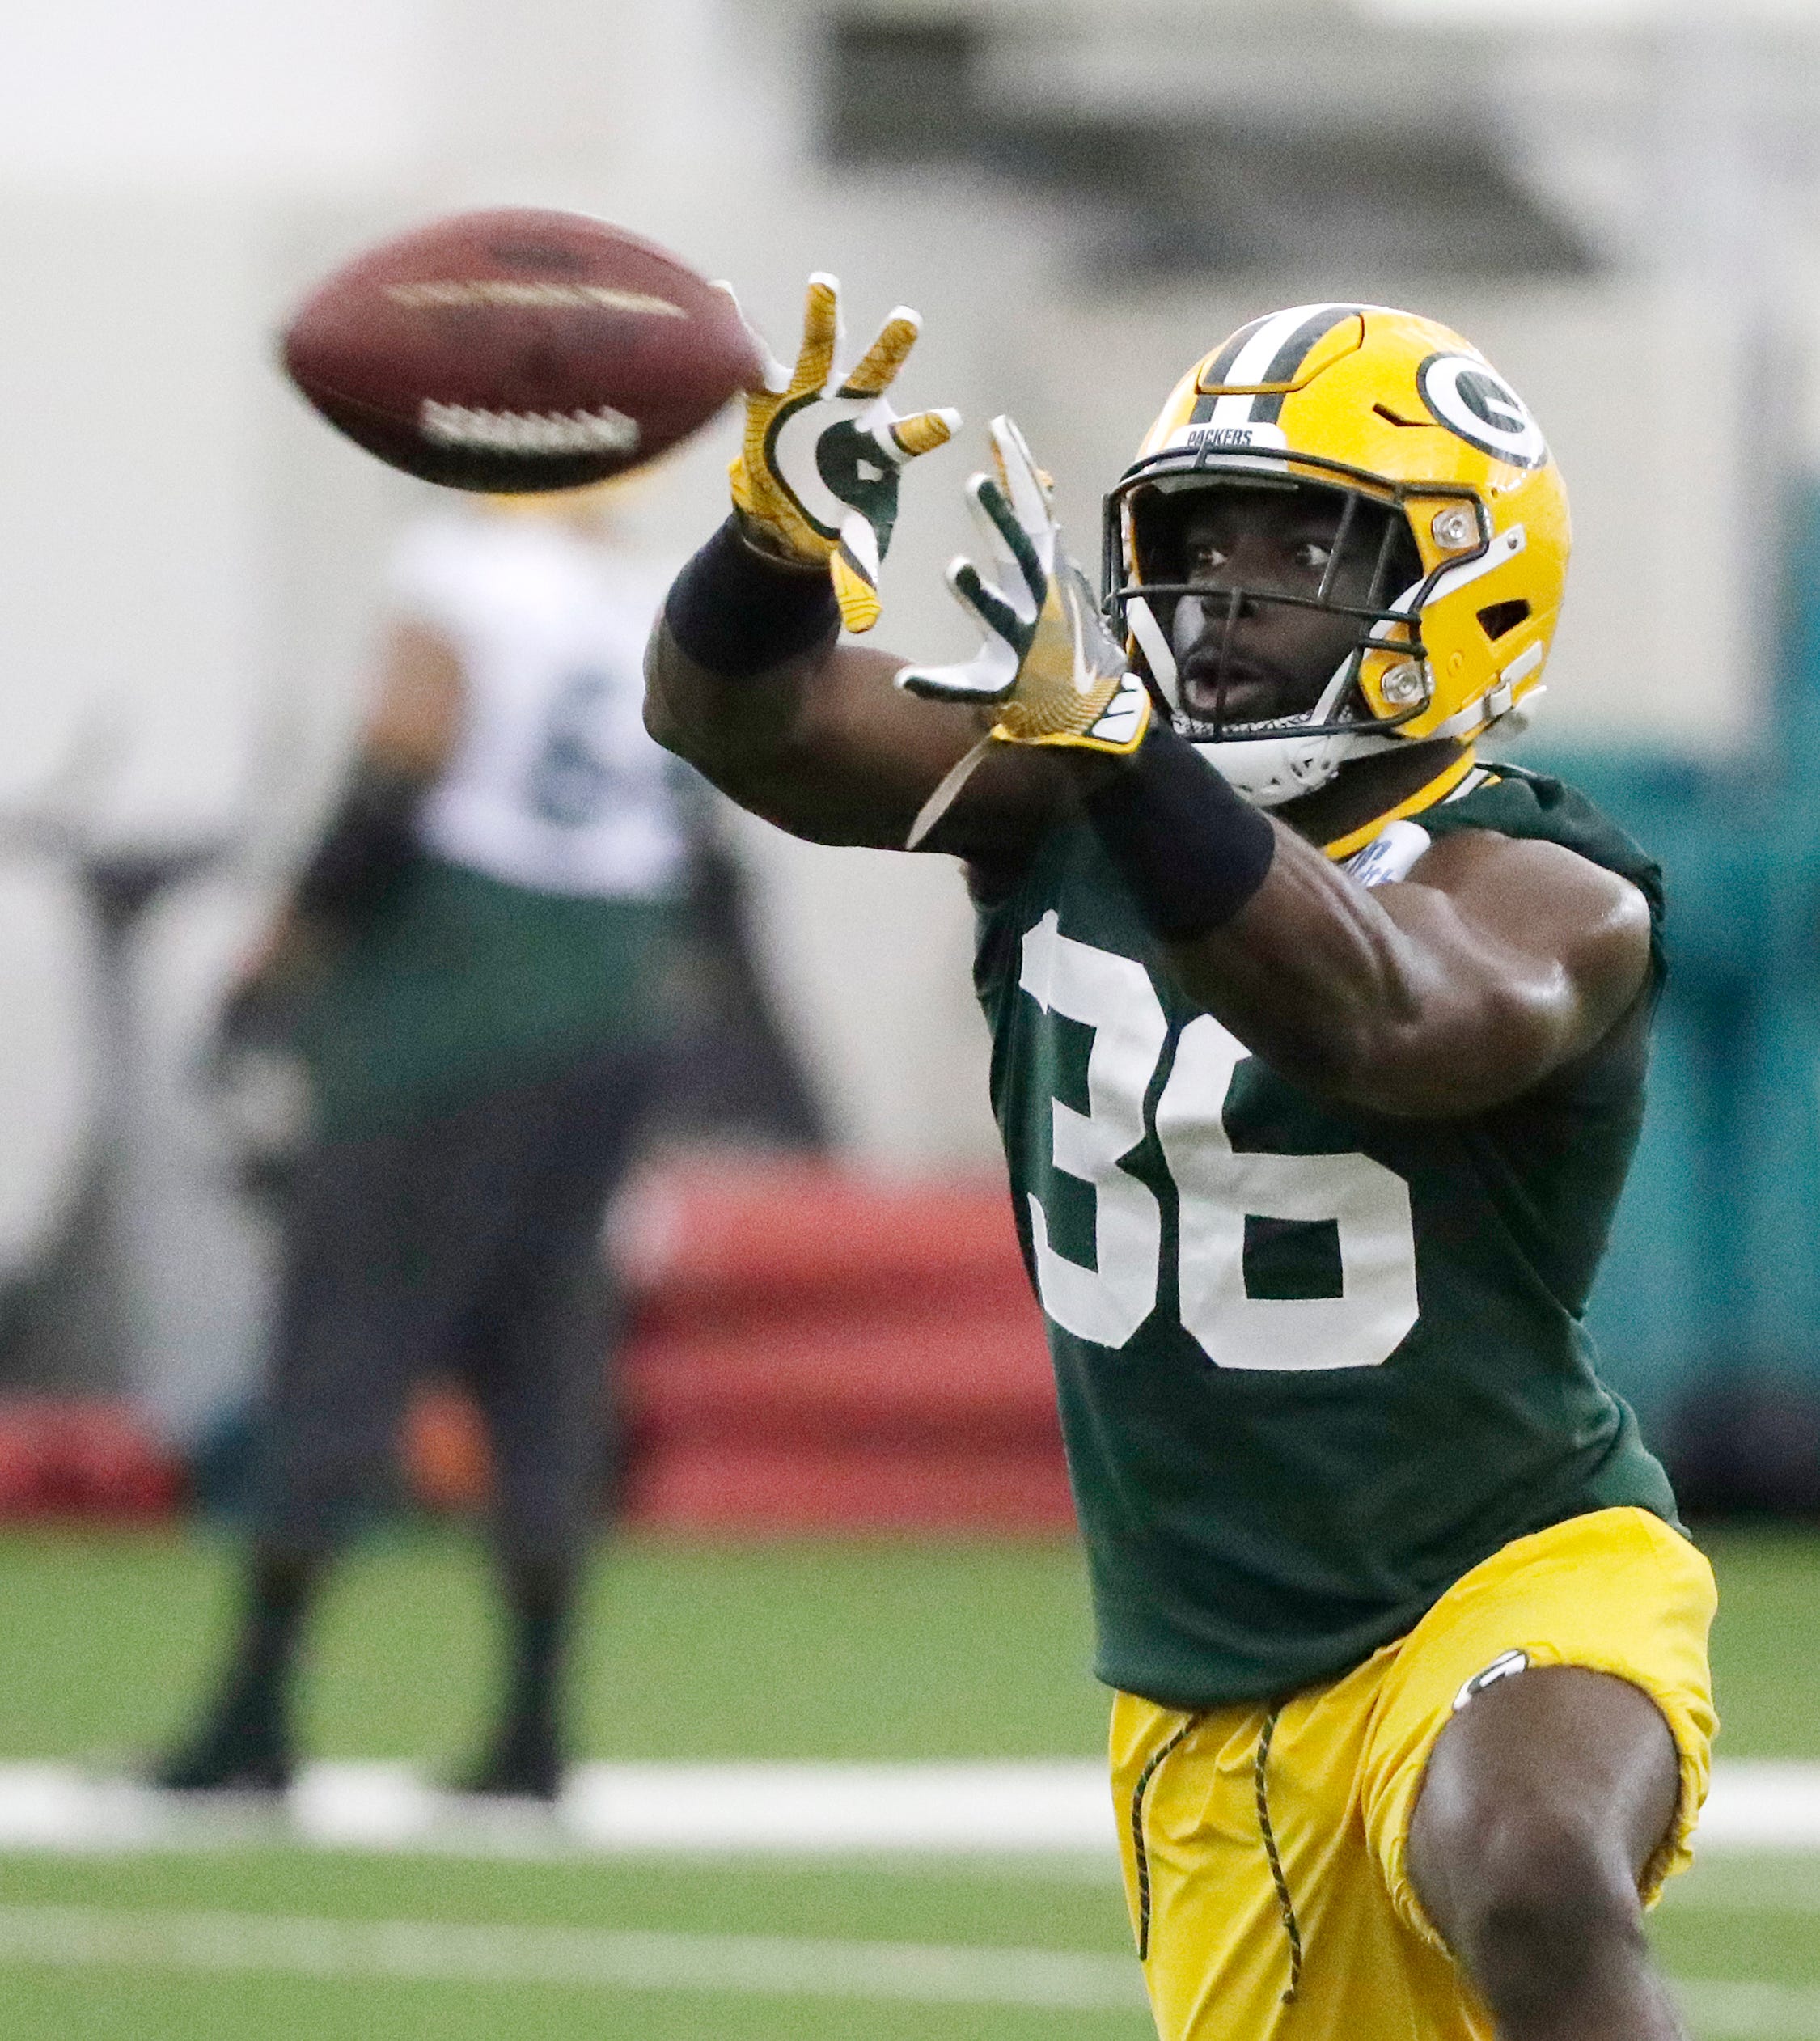 Green Bay Packers defensive back Raven Greene (36) during a team practice at the Don Hutson Center on Wednesday, April 24, 2019 in Ashwaubenon, Wis.